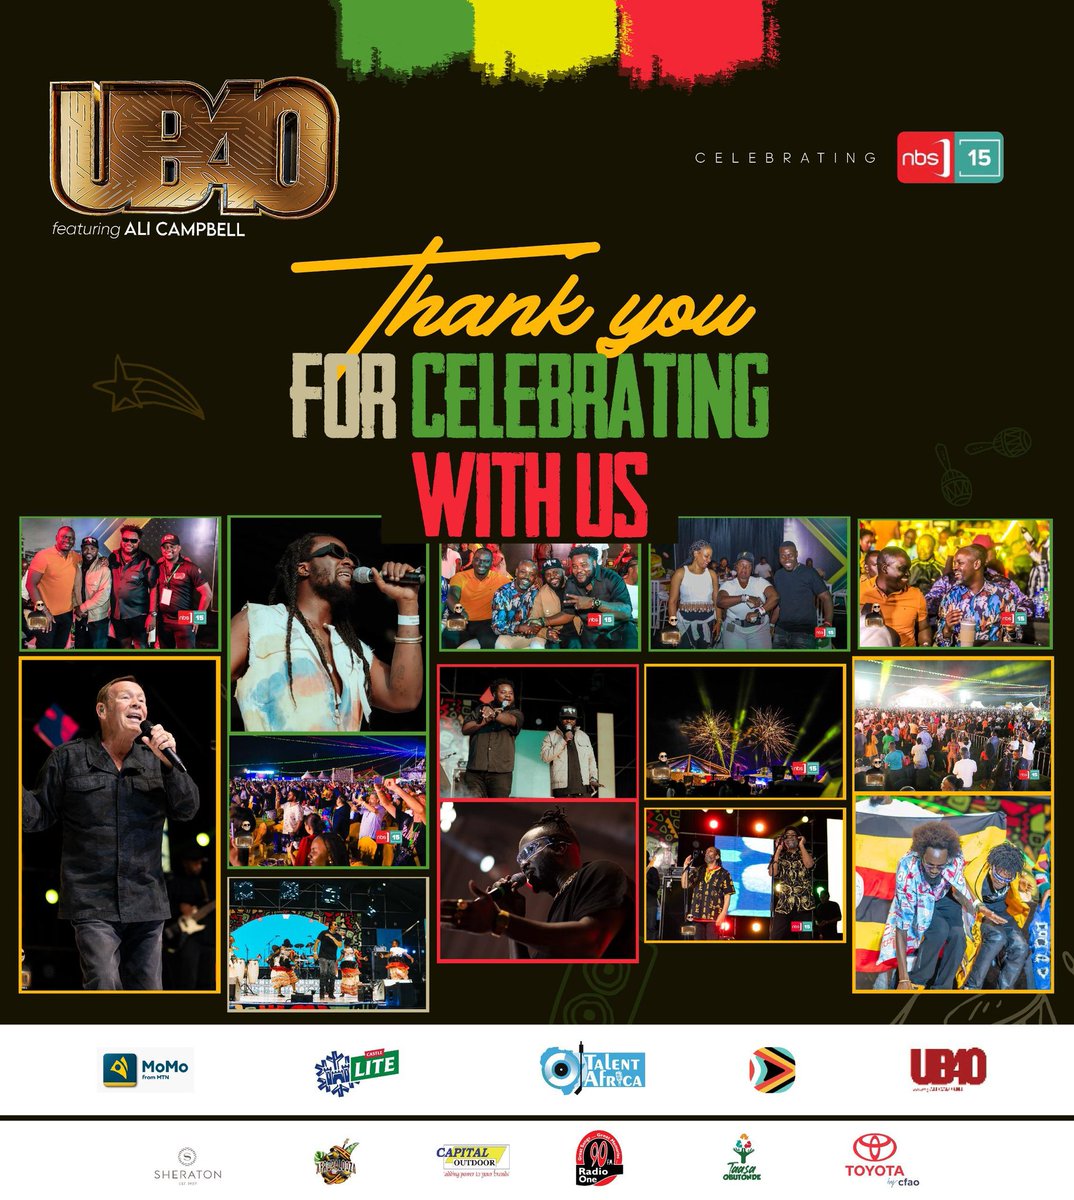 The #UB40FtAliCampbell concert was such a success 😍😍, thank you for turning up and vibing with us. Watch out for the #NextBiggerThing 😂😂

#TagEvents